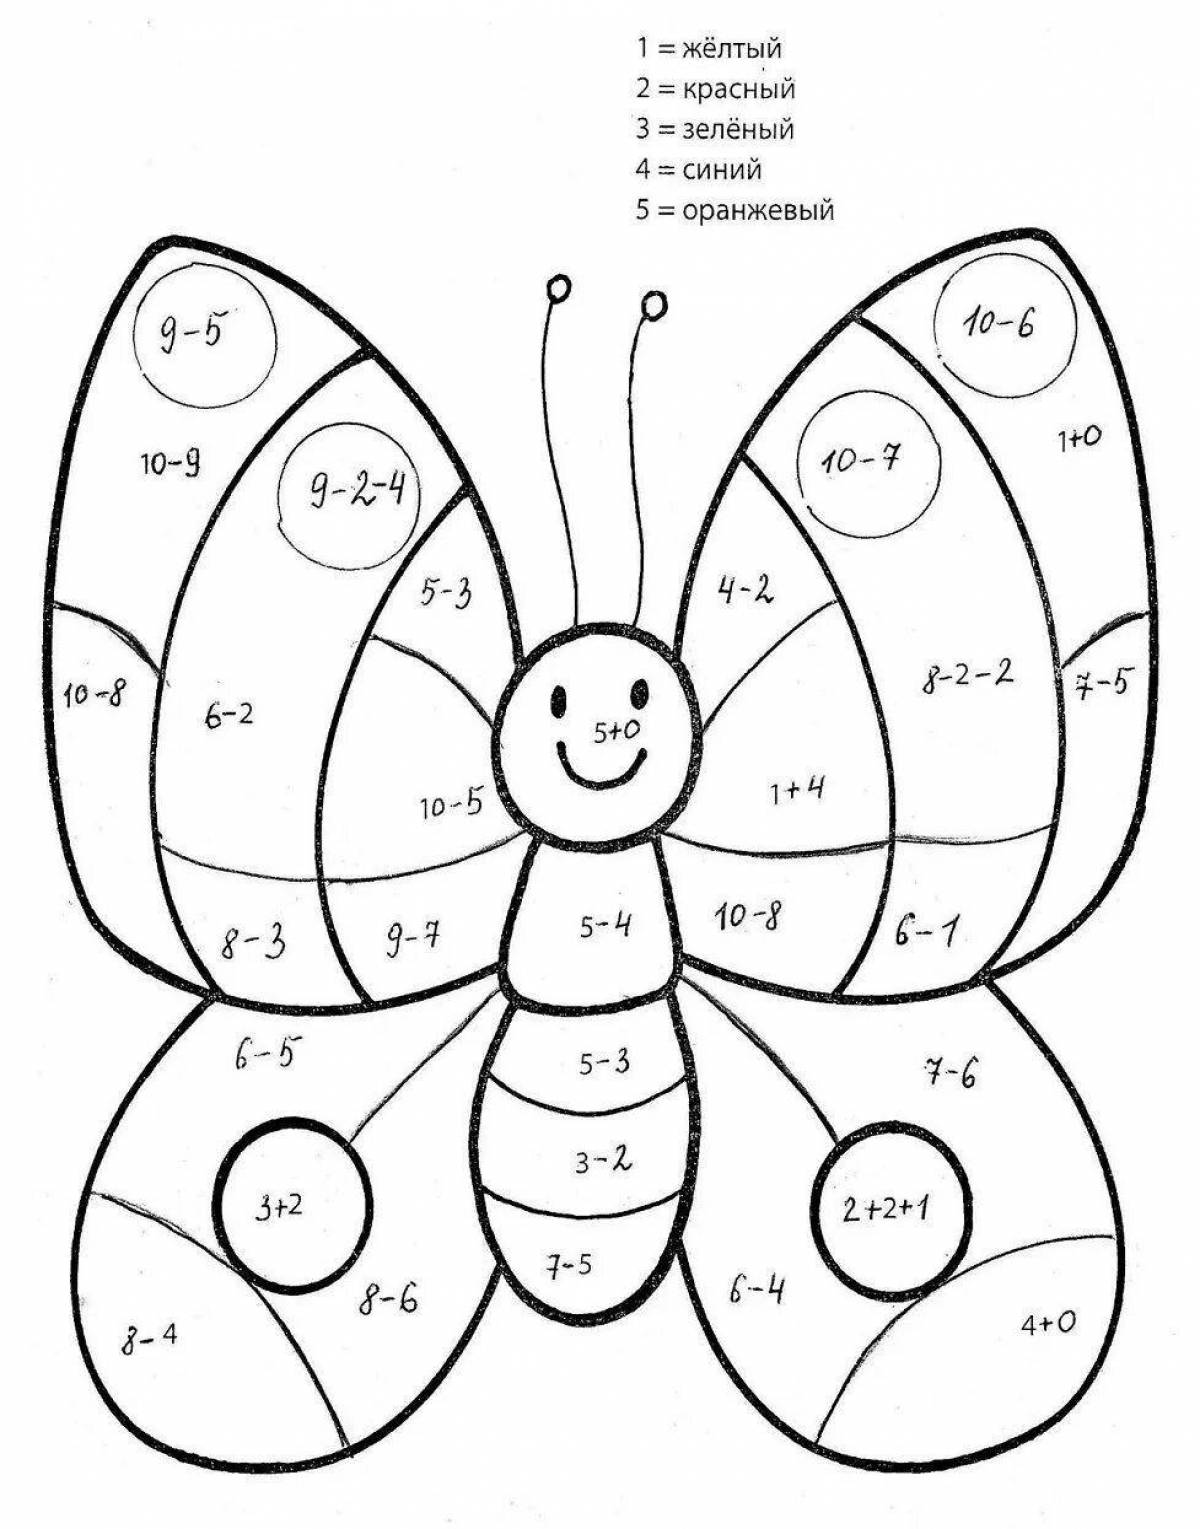 Inspirational coloring book for first graders with tasks